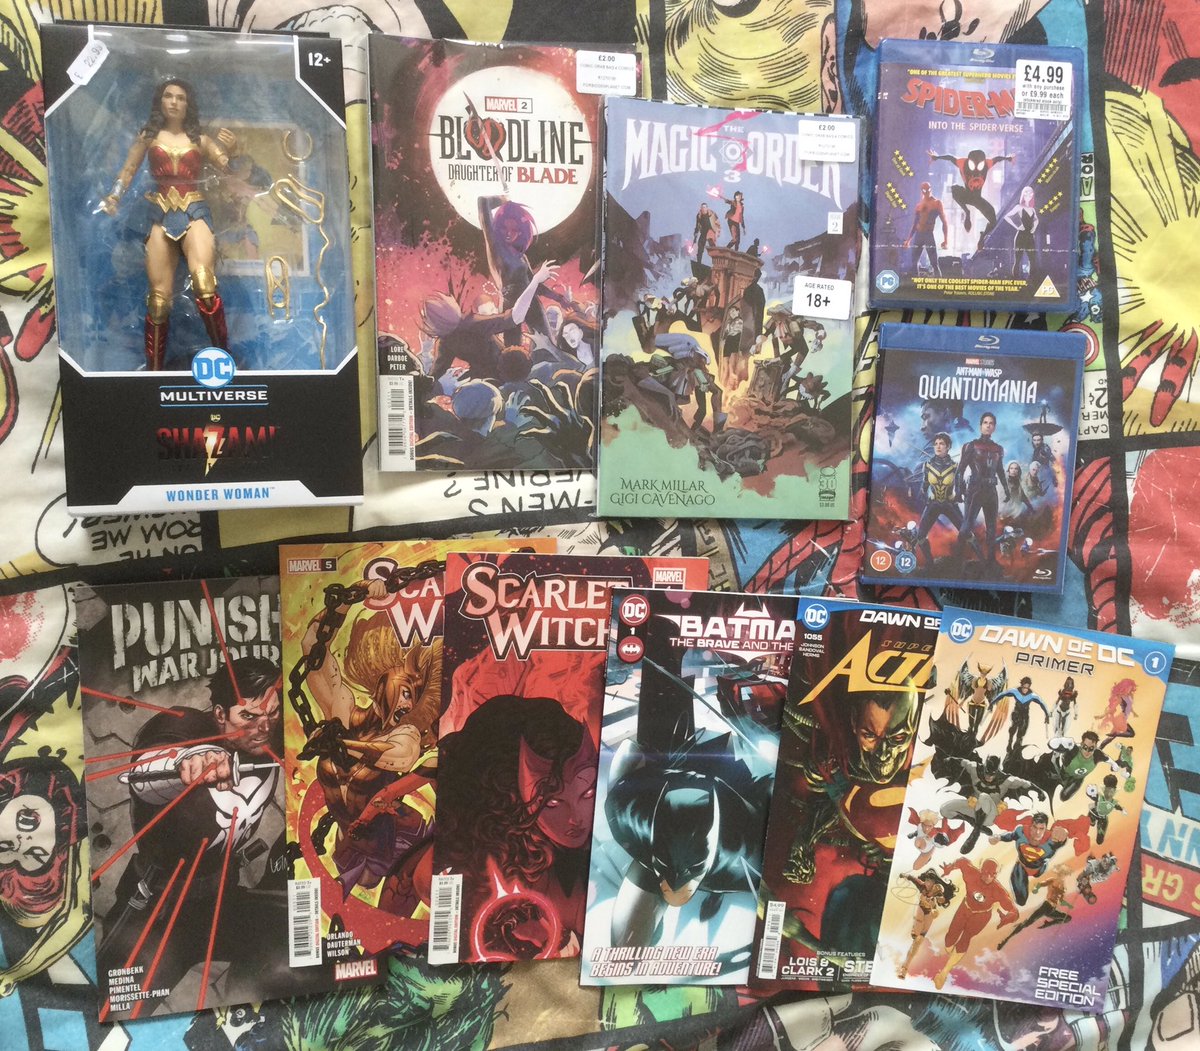 My haul that I bought from a recent trip to #Liverpool city centre! Two grab-bag #comic packs from @ForbiddenPlanet, two #Marvel #Bluray’s from @hmvLiverpool & some comics, a graphic novel and a @GalGadot #WonderWoman action figure from @WorldsApart_Liv! 😉